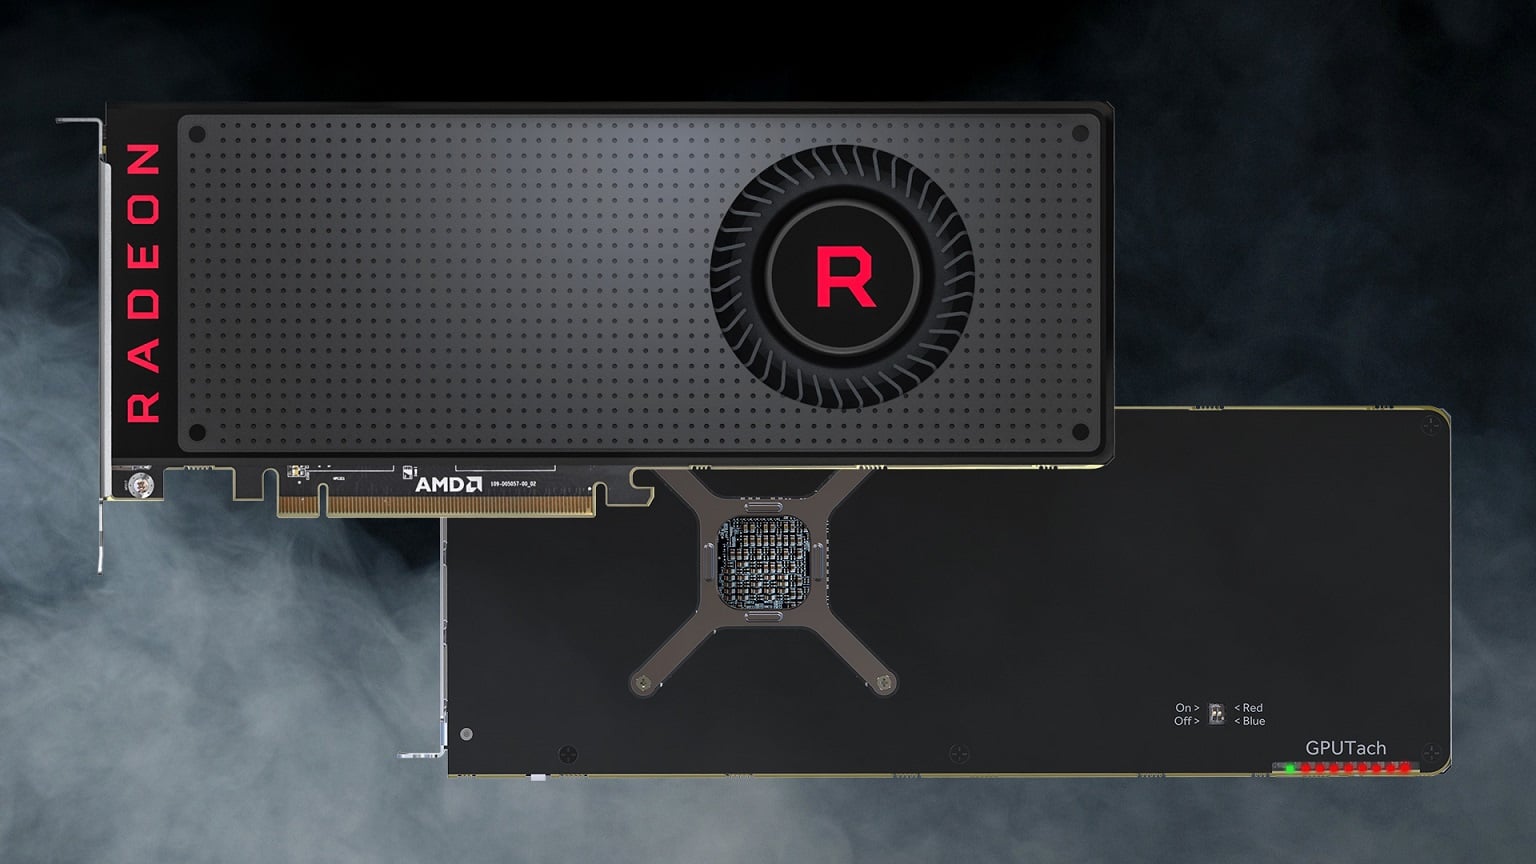 AMD Makes Official Statement Regarding RX Vega Price Increase Controversy